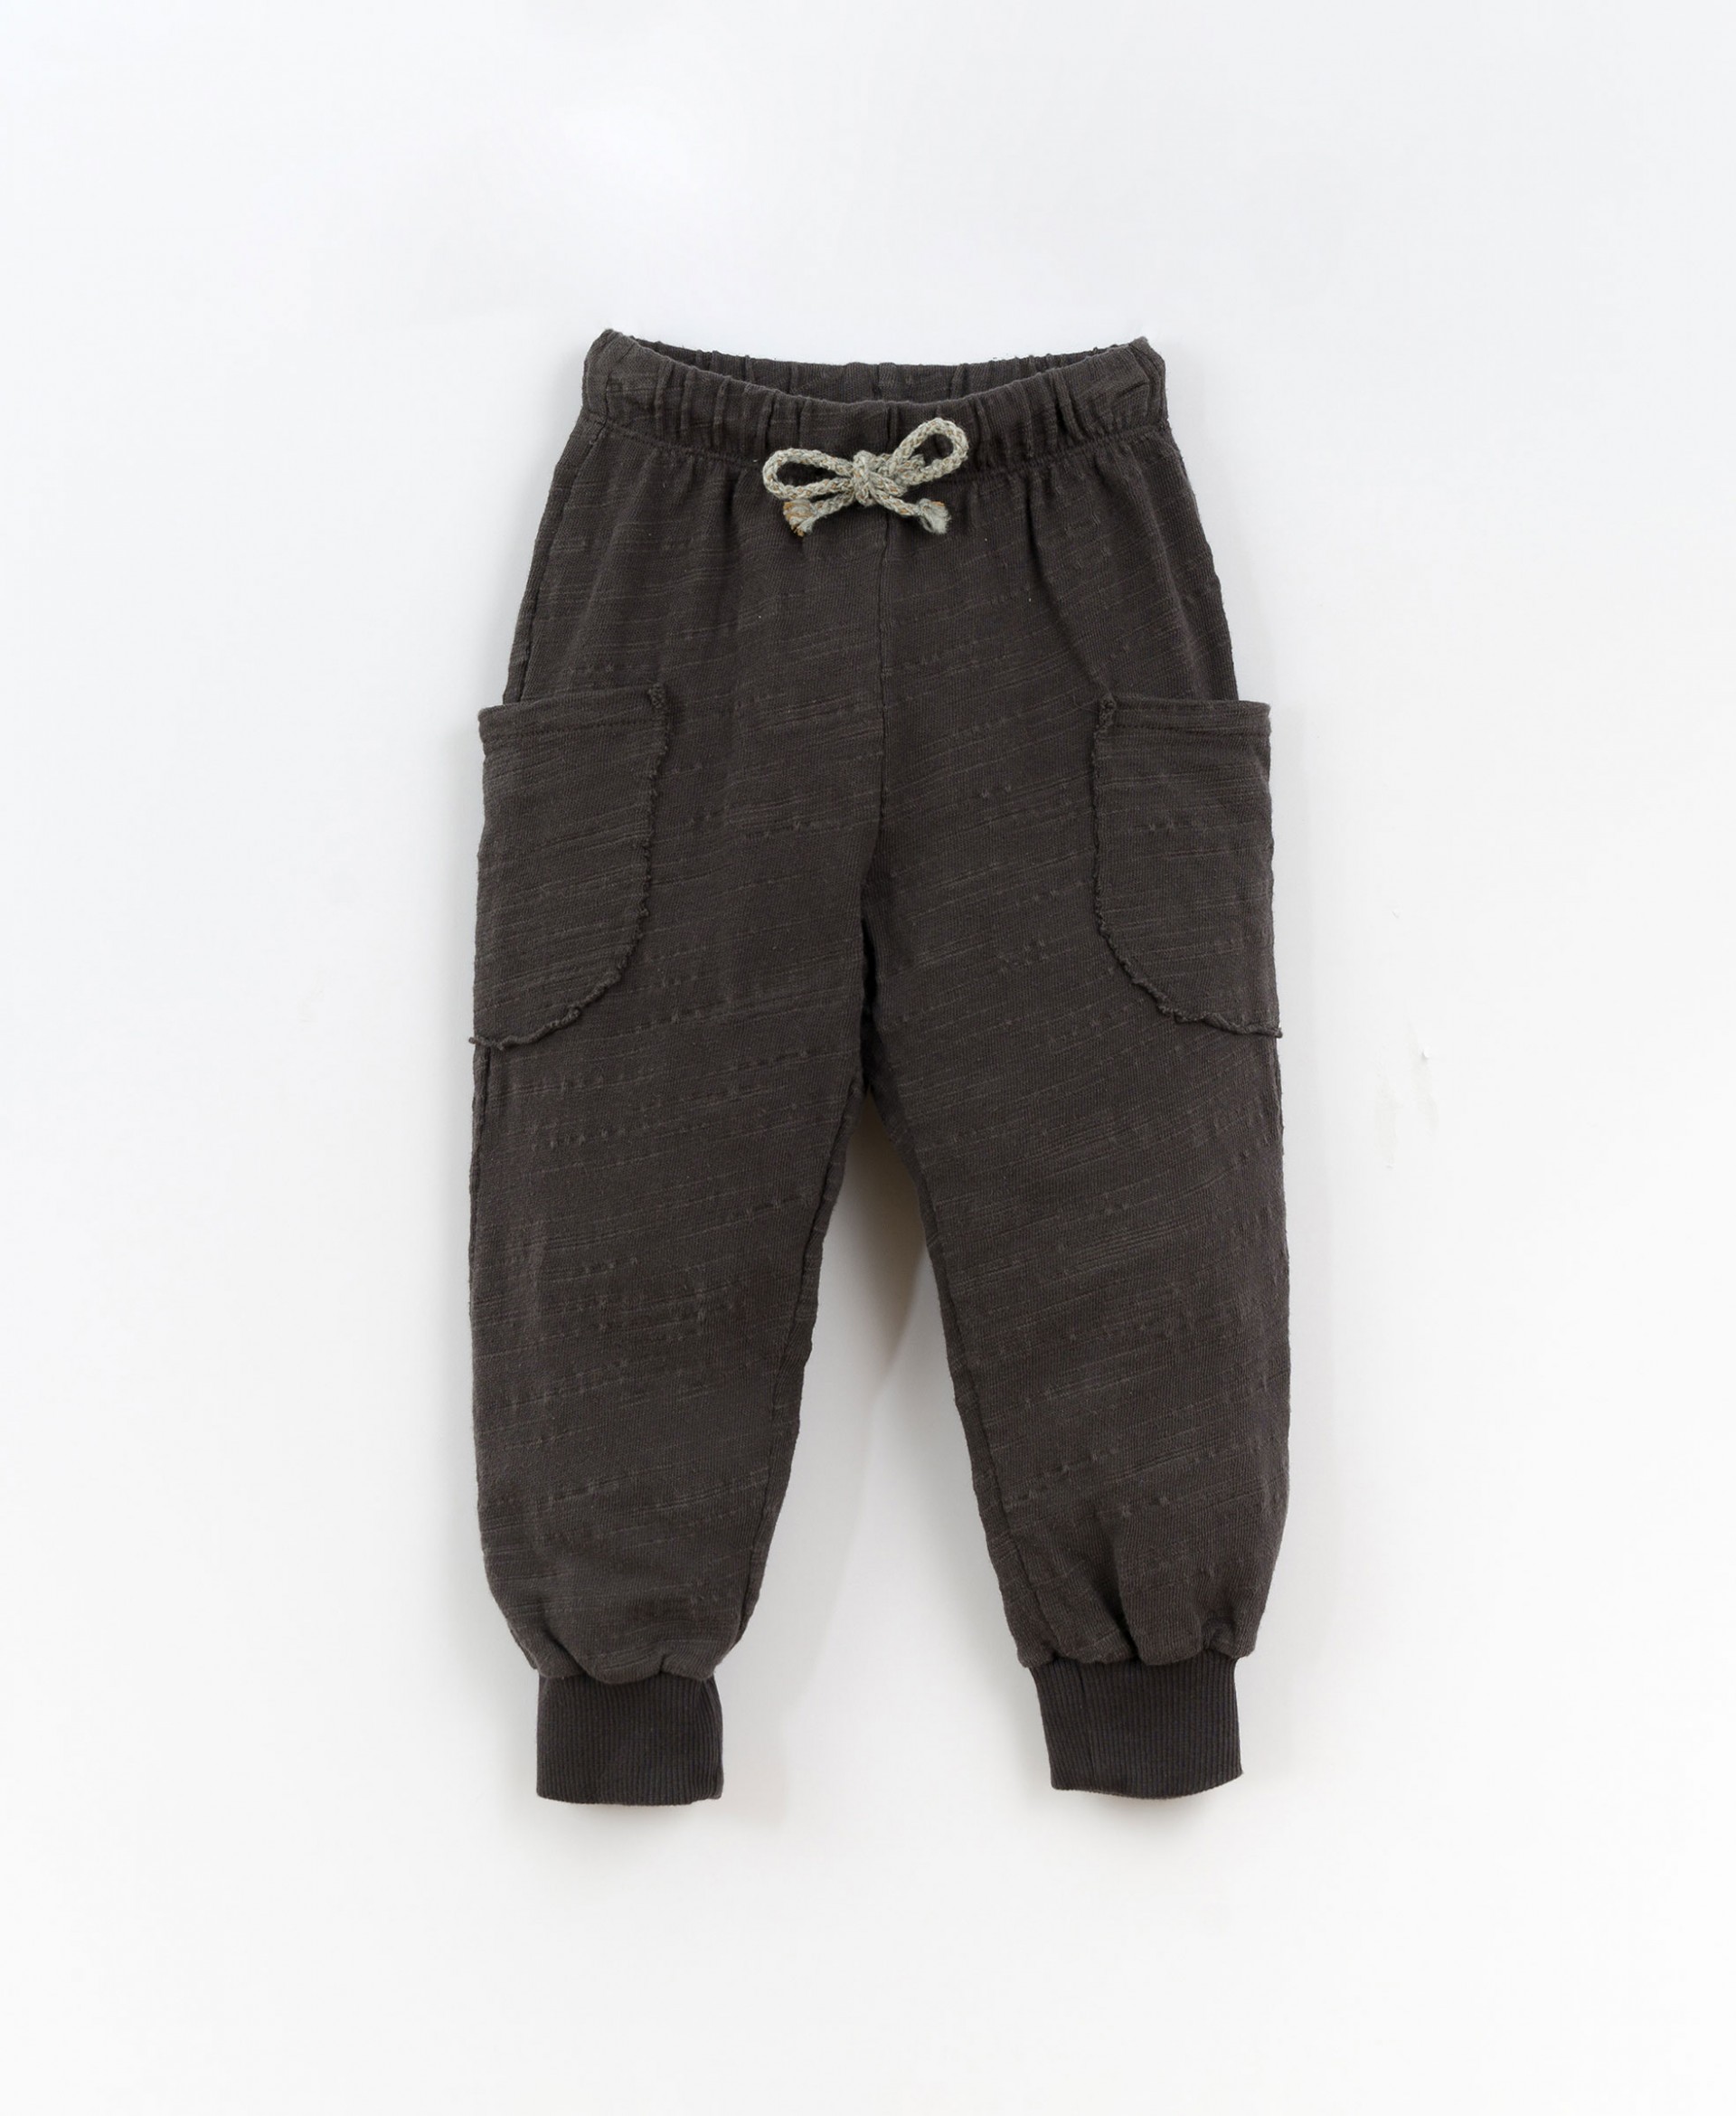 Jersey stitch trousers made of recycled fibres | Culinary